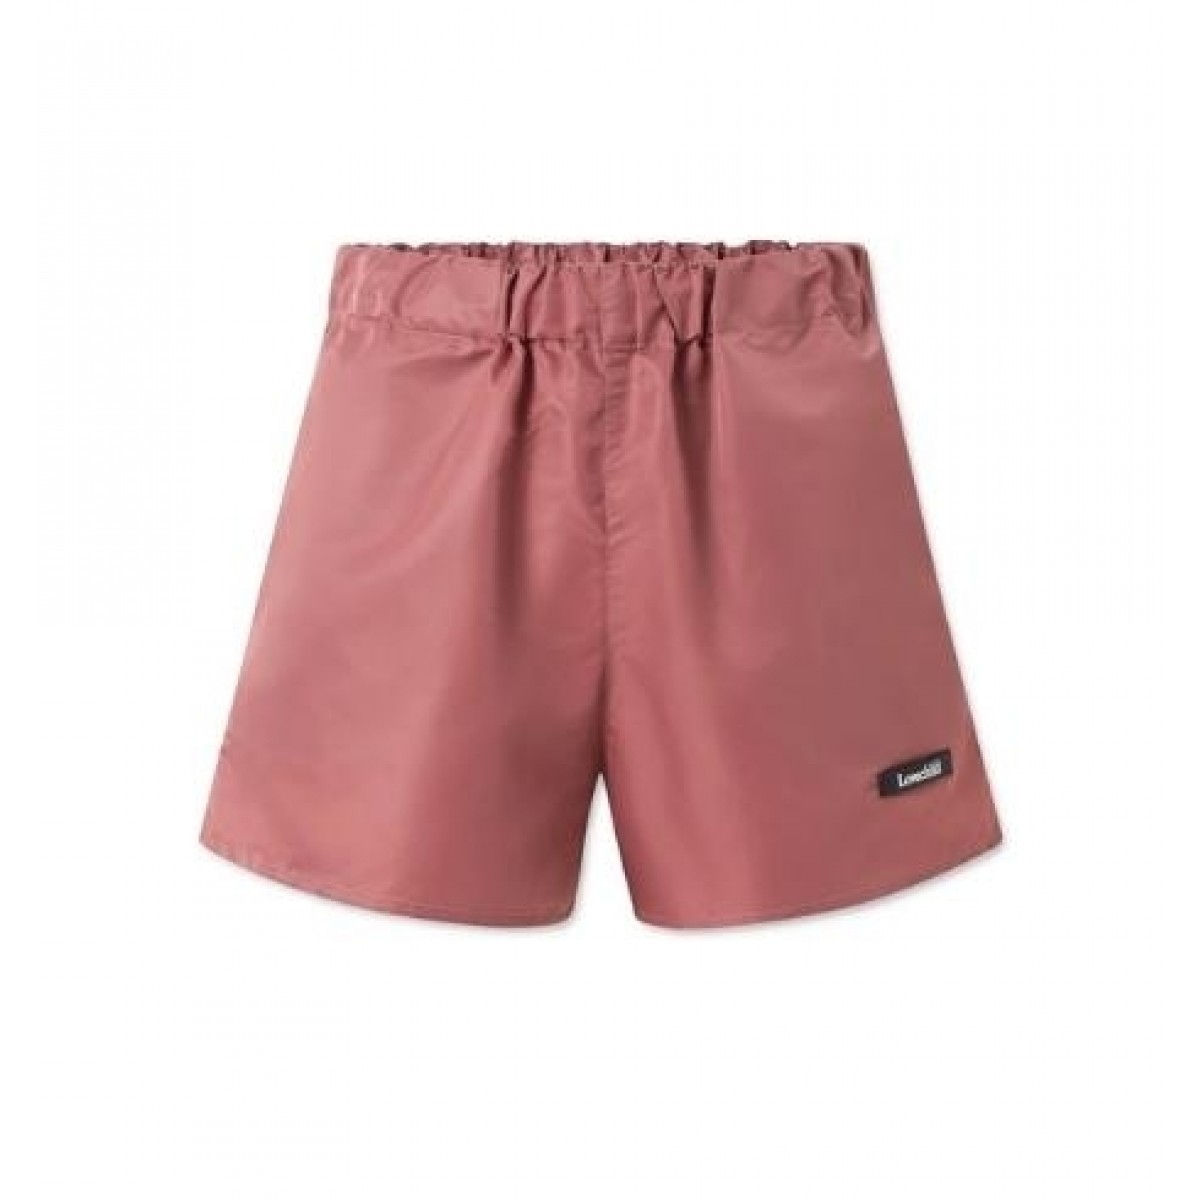 alessio shorts - old rose - front